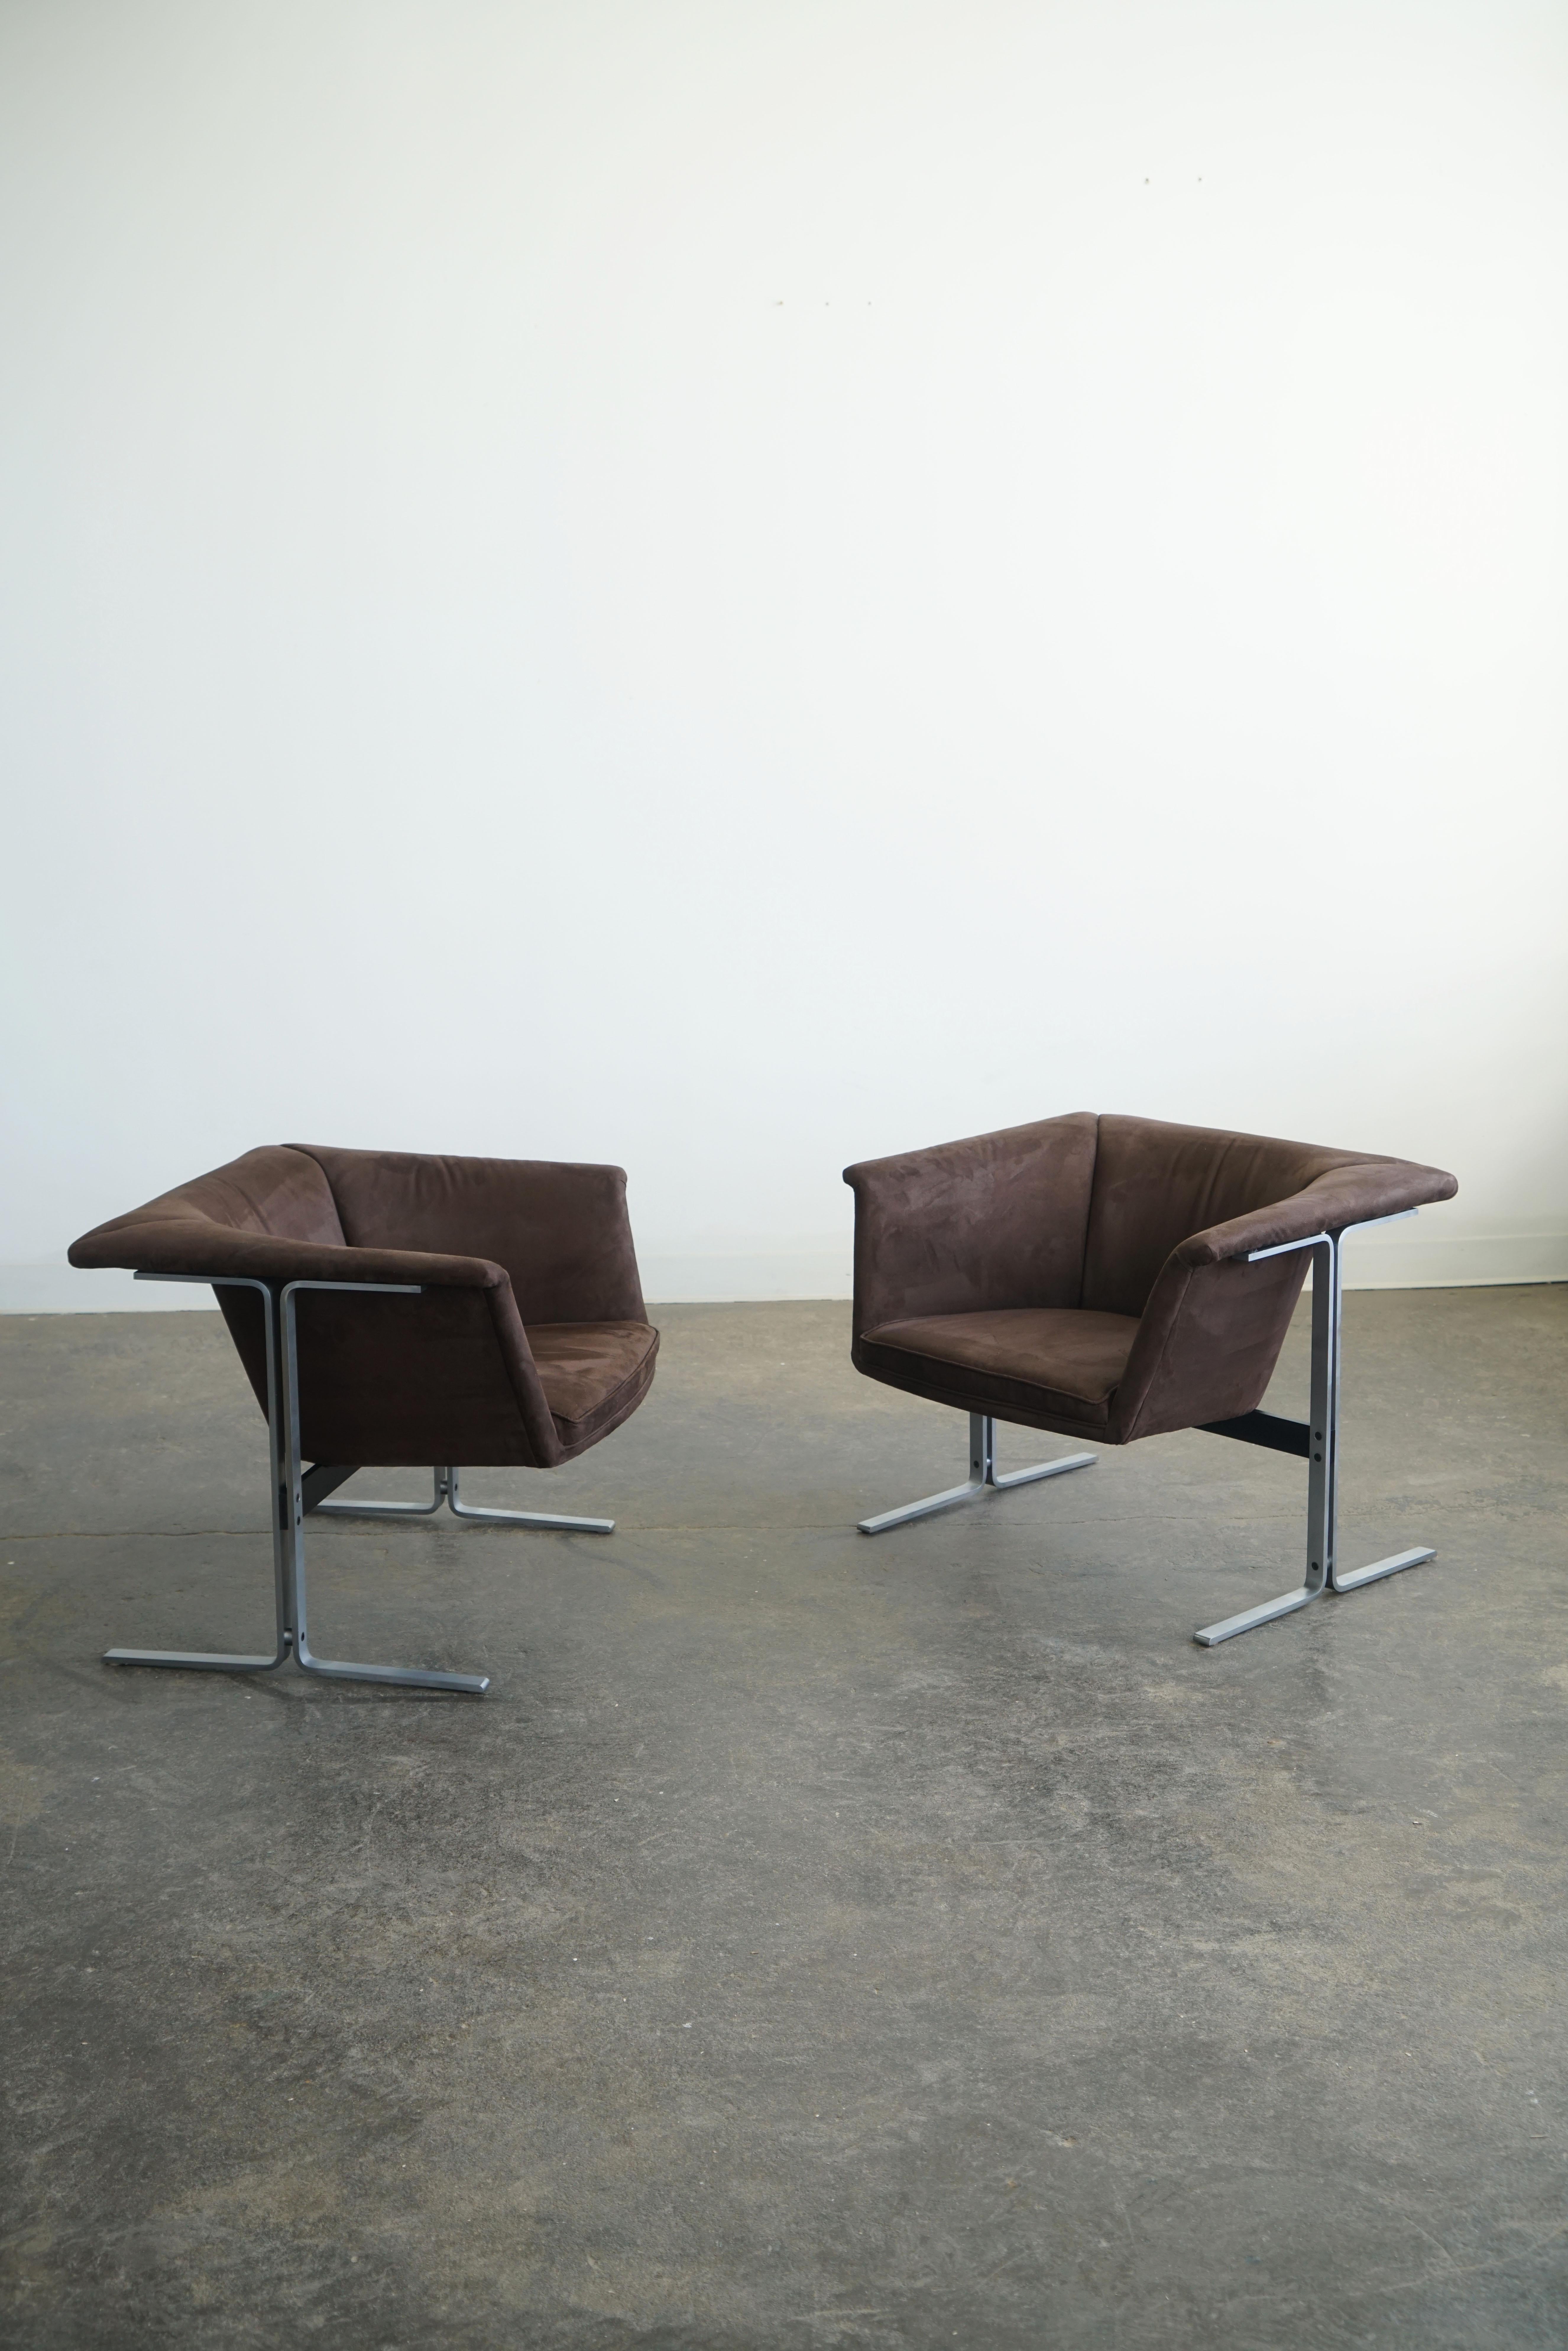 Danish Pair of Geoffrey Harcourt Model 042 Lounge Chairs by Artifort 1965 For Sale